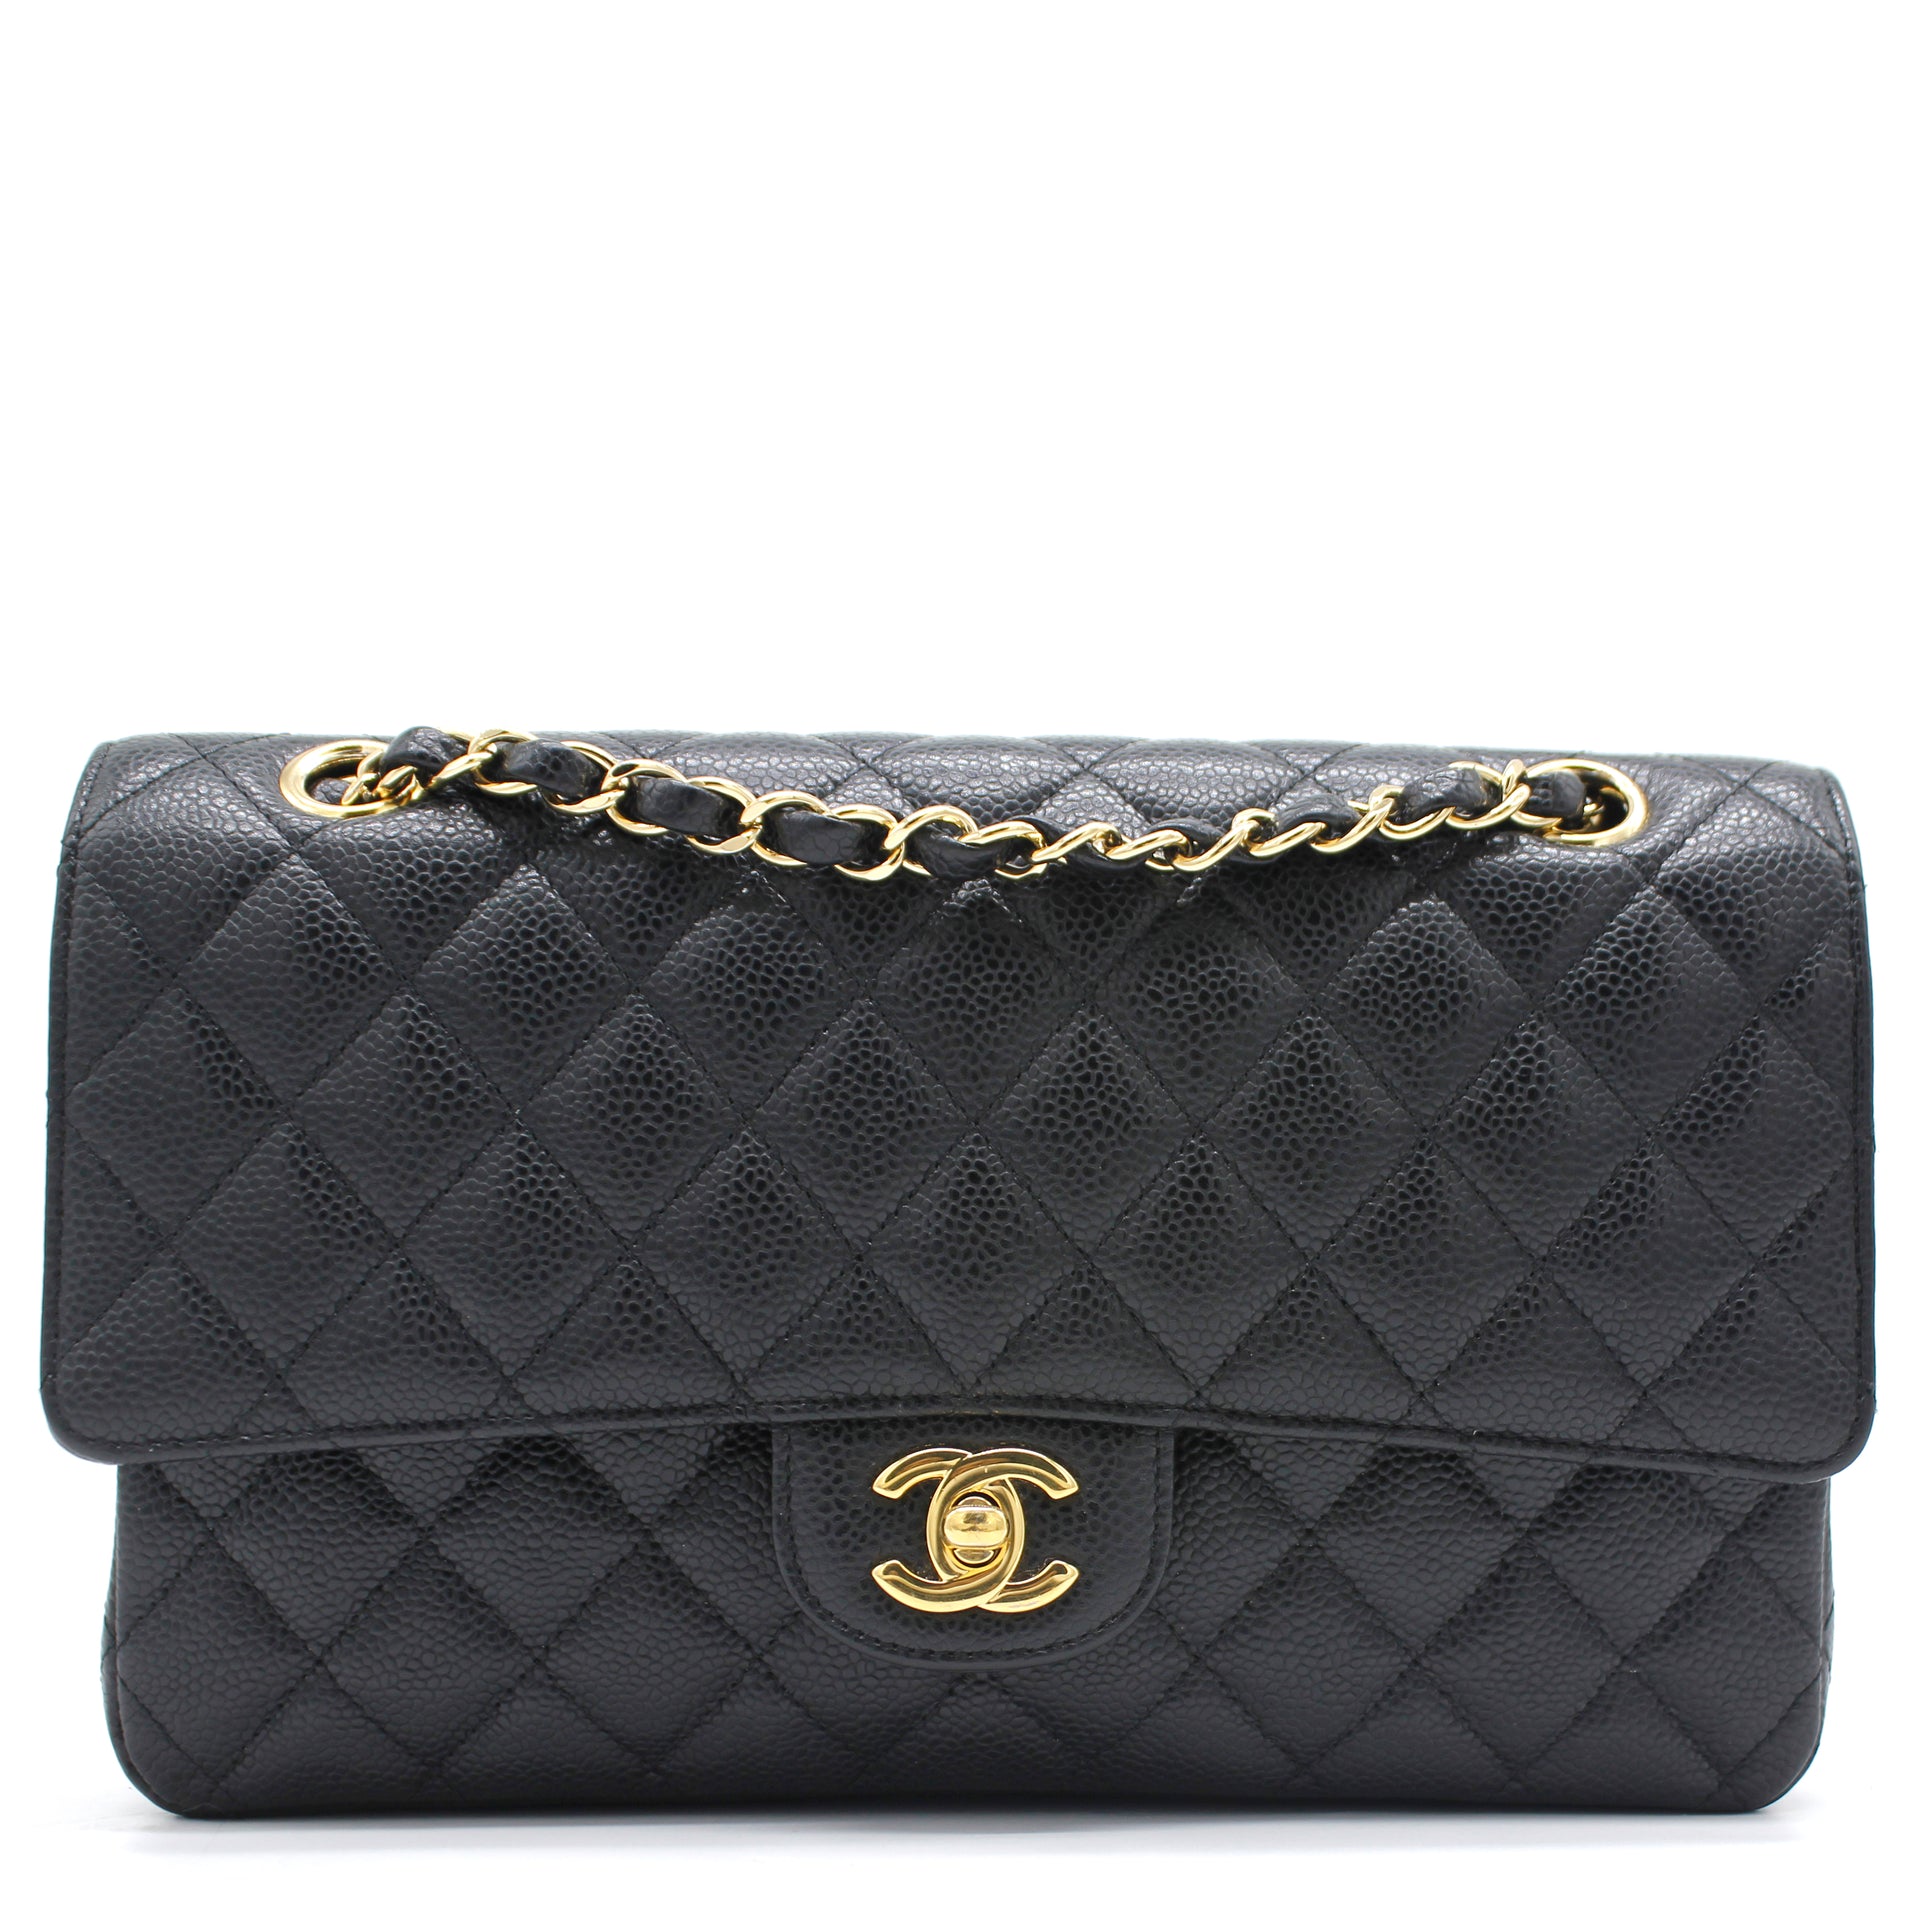 CHANEL Classic Large 11 Caviar Grained calf leather Flap Shoulder